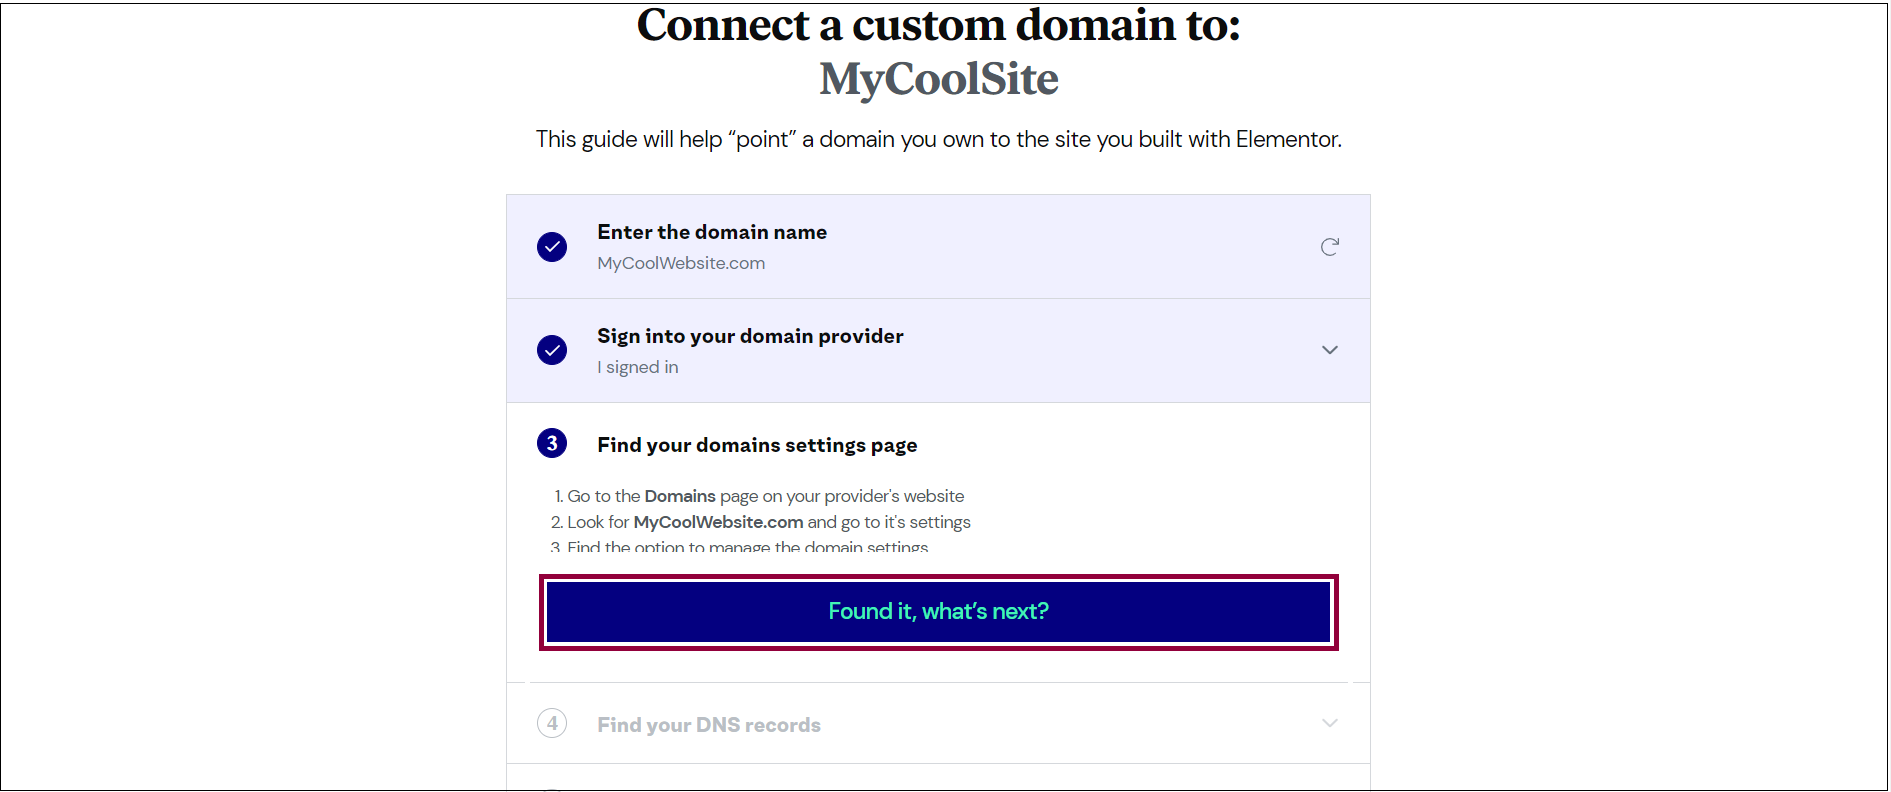 5 Connect a custom domain redder Connecting your Google domain name to an Elementor hosted website 15